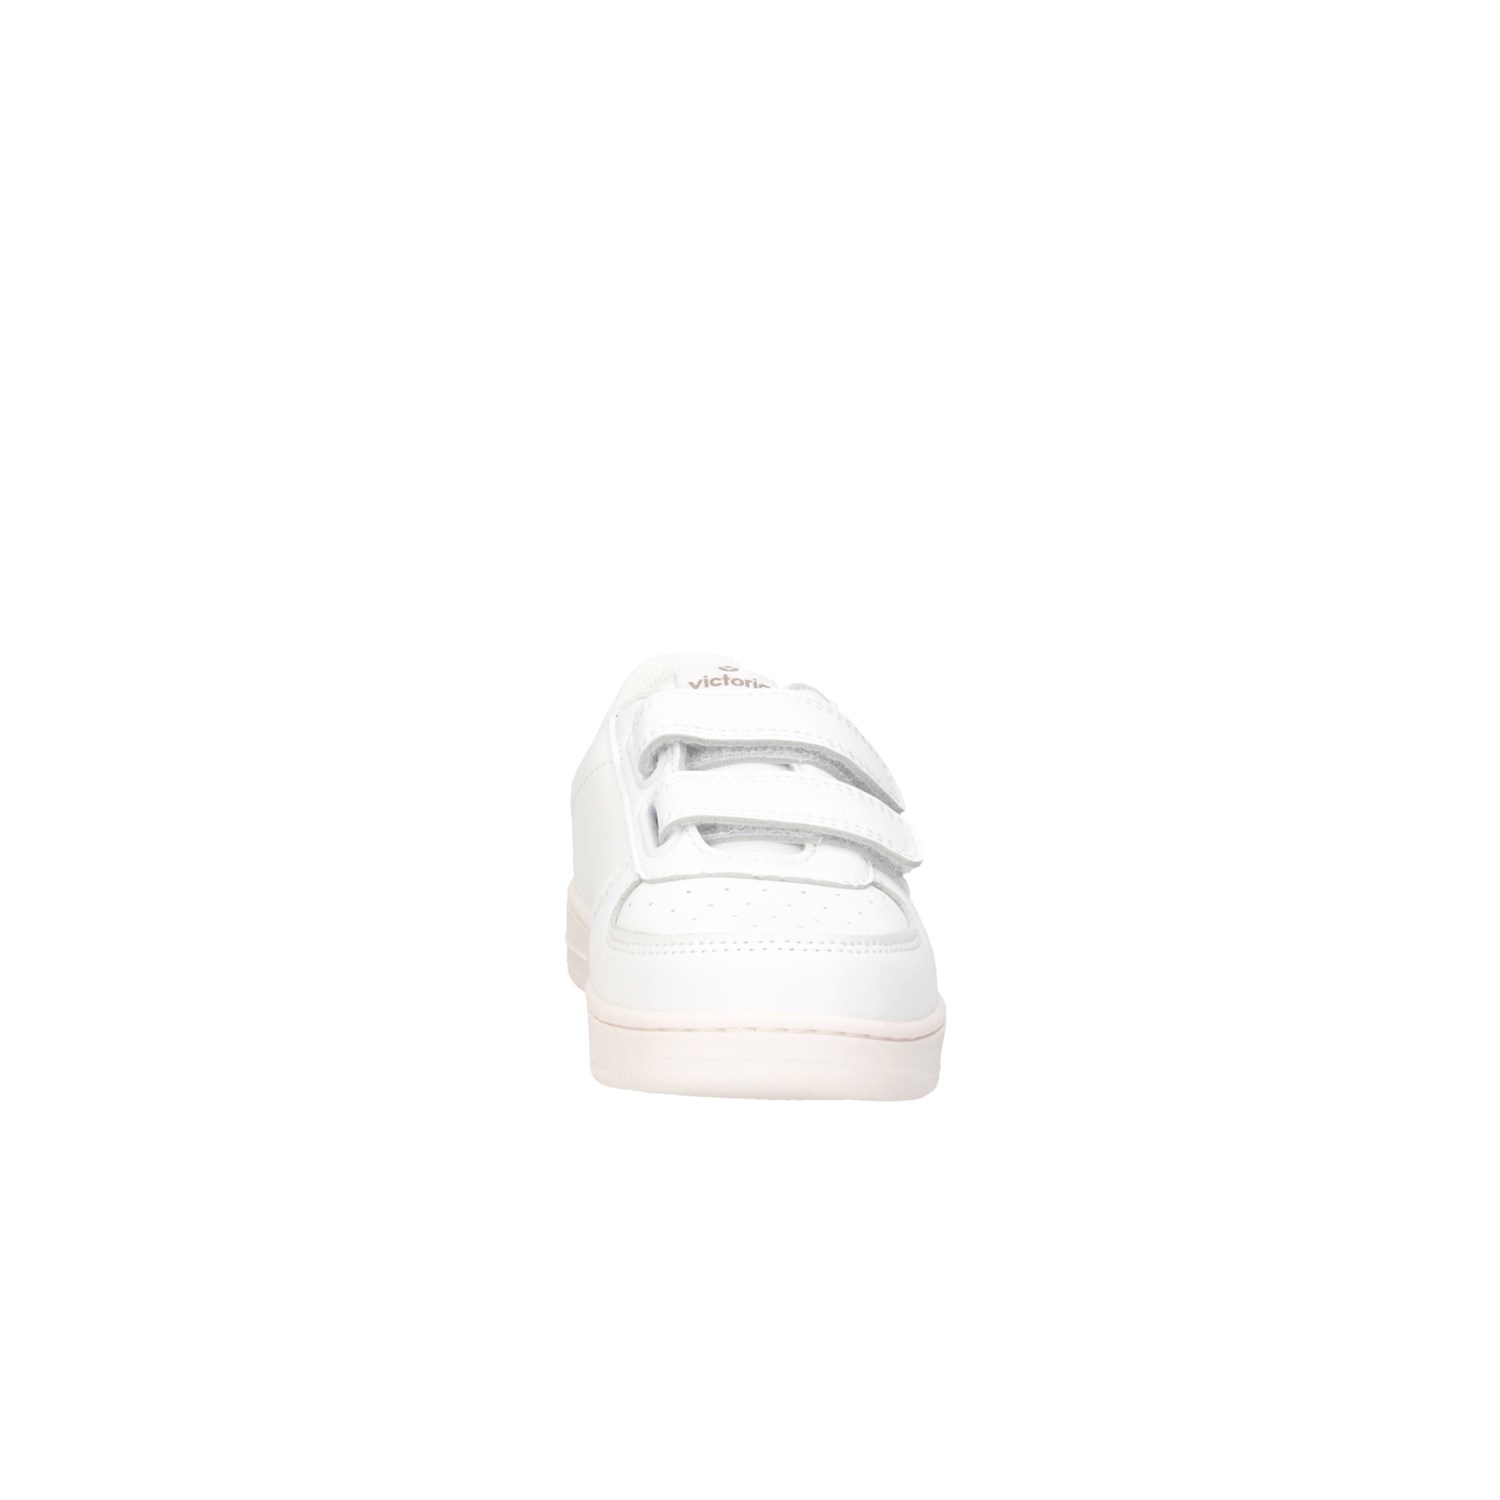 Victoria Made In Spain 1124104 Blue Shoes Child 